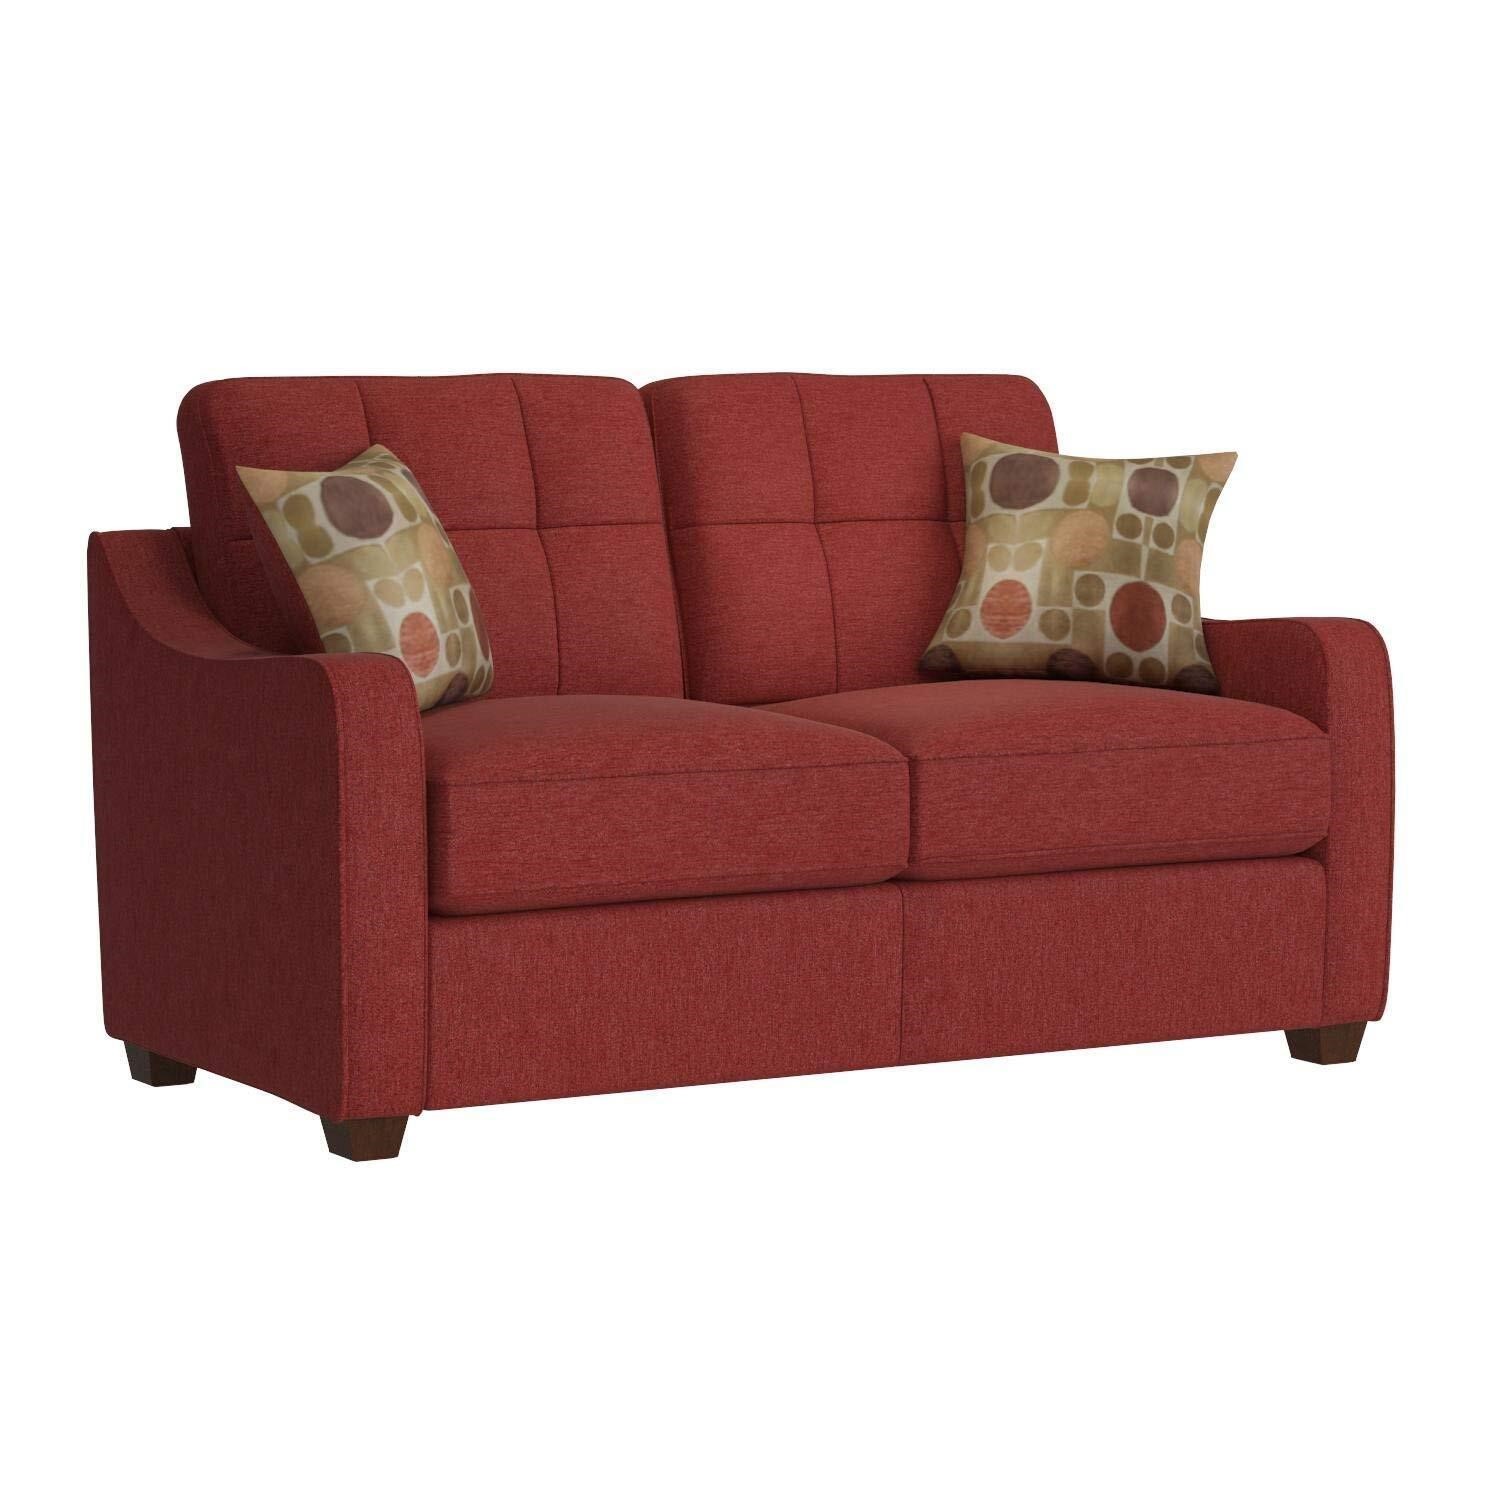 Acme Cleavon II Linen Fabric Tufted Loveseat in Re